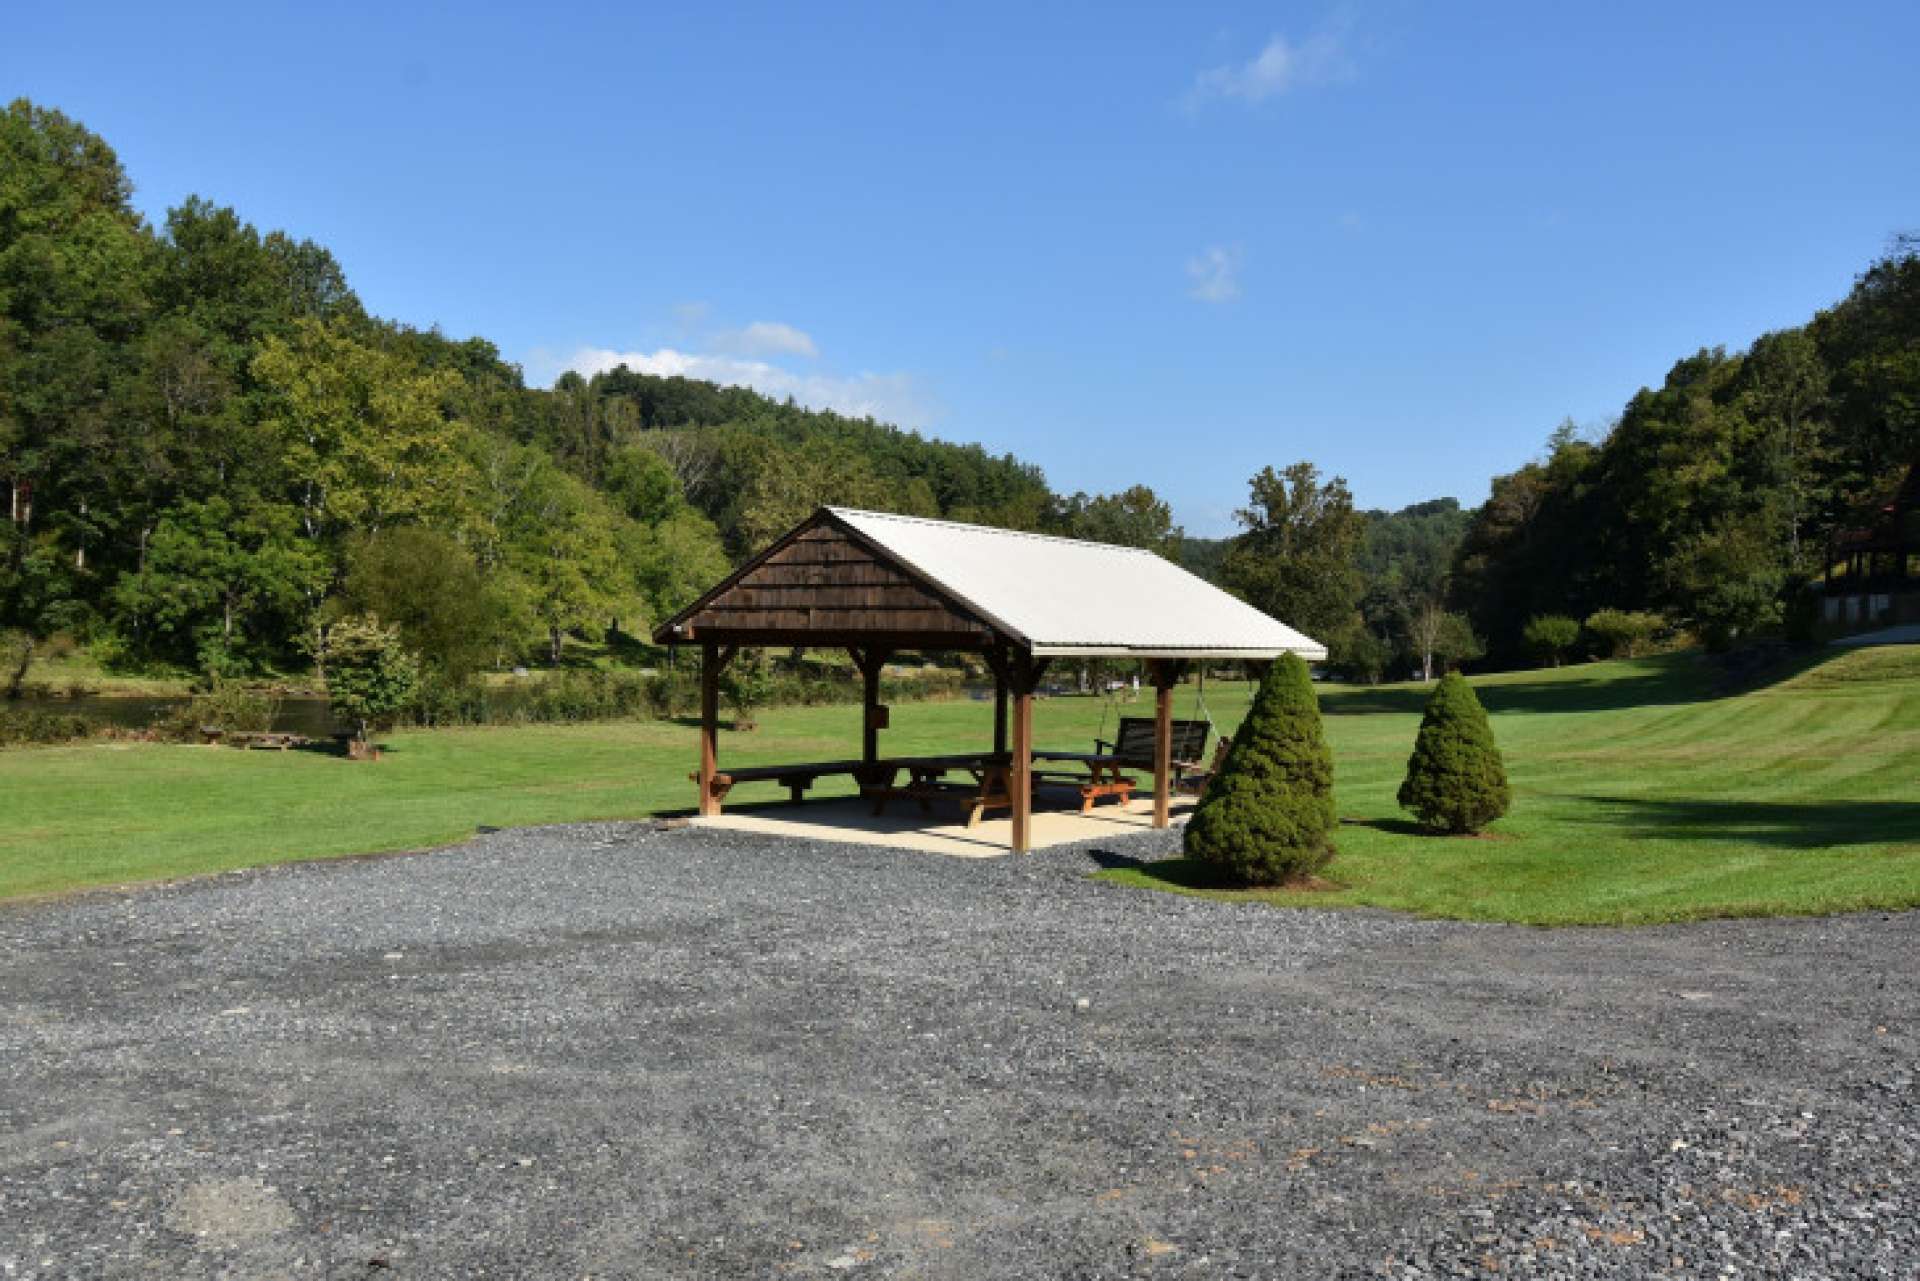 Hidden Mountain also offers a wonderful common area on the banks of the river.  Enjoy a wonderful day of river activities, along with a picnic in the pavilion,  or roast marshmallows and hotdogs while sharing stories around the fire pit along the river bank.